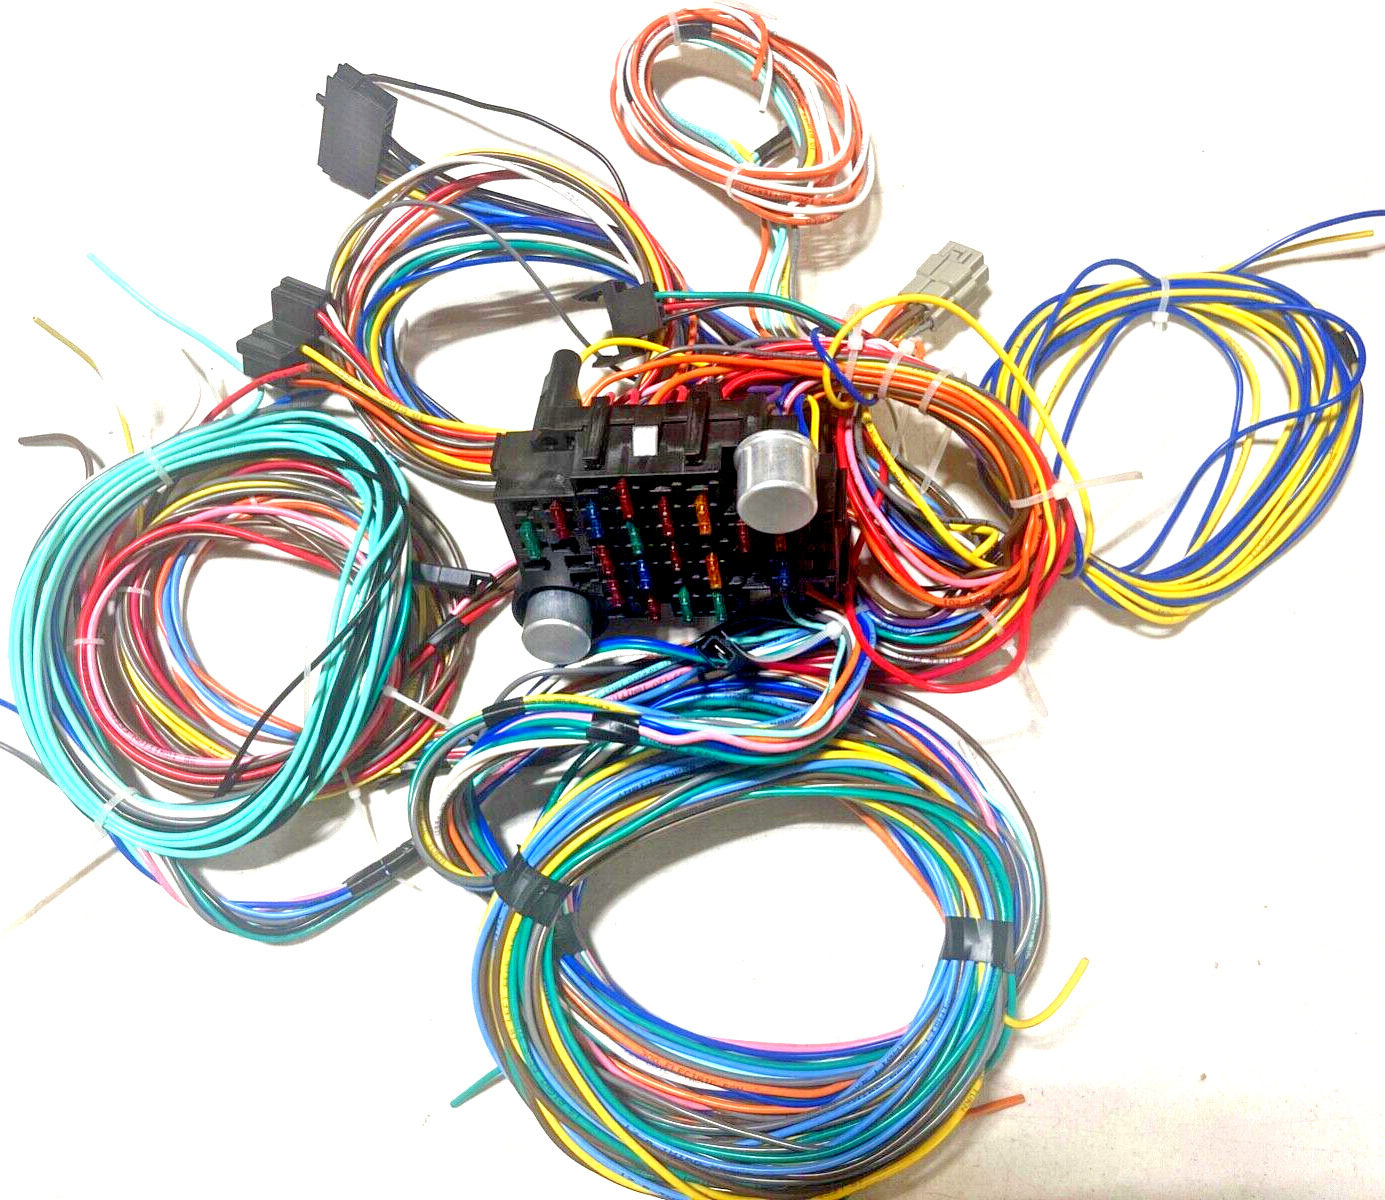 Street Rod or Custom Car Truck Wire Harness Complete Wiring Kit 1 or 3 Wire Alt